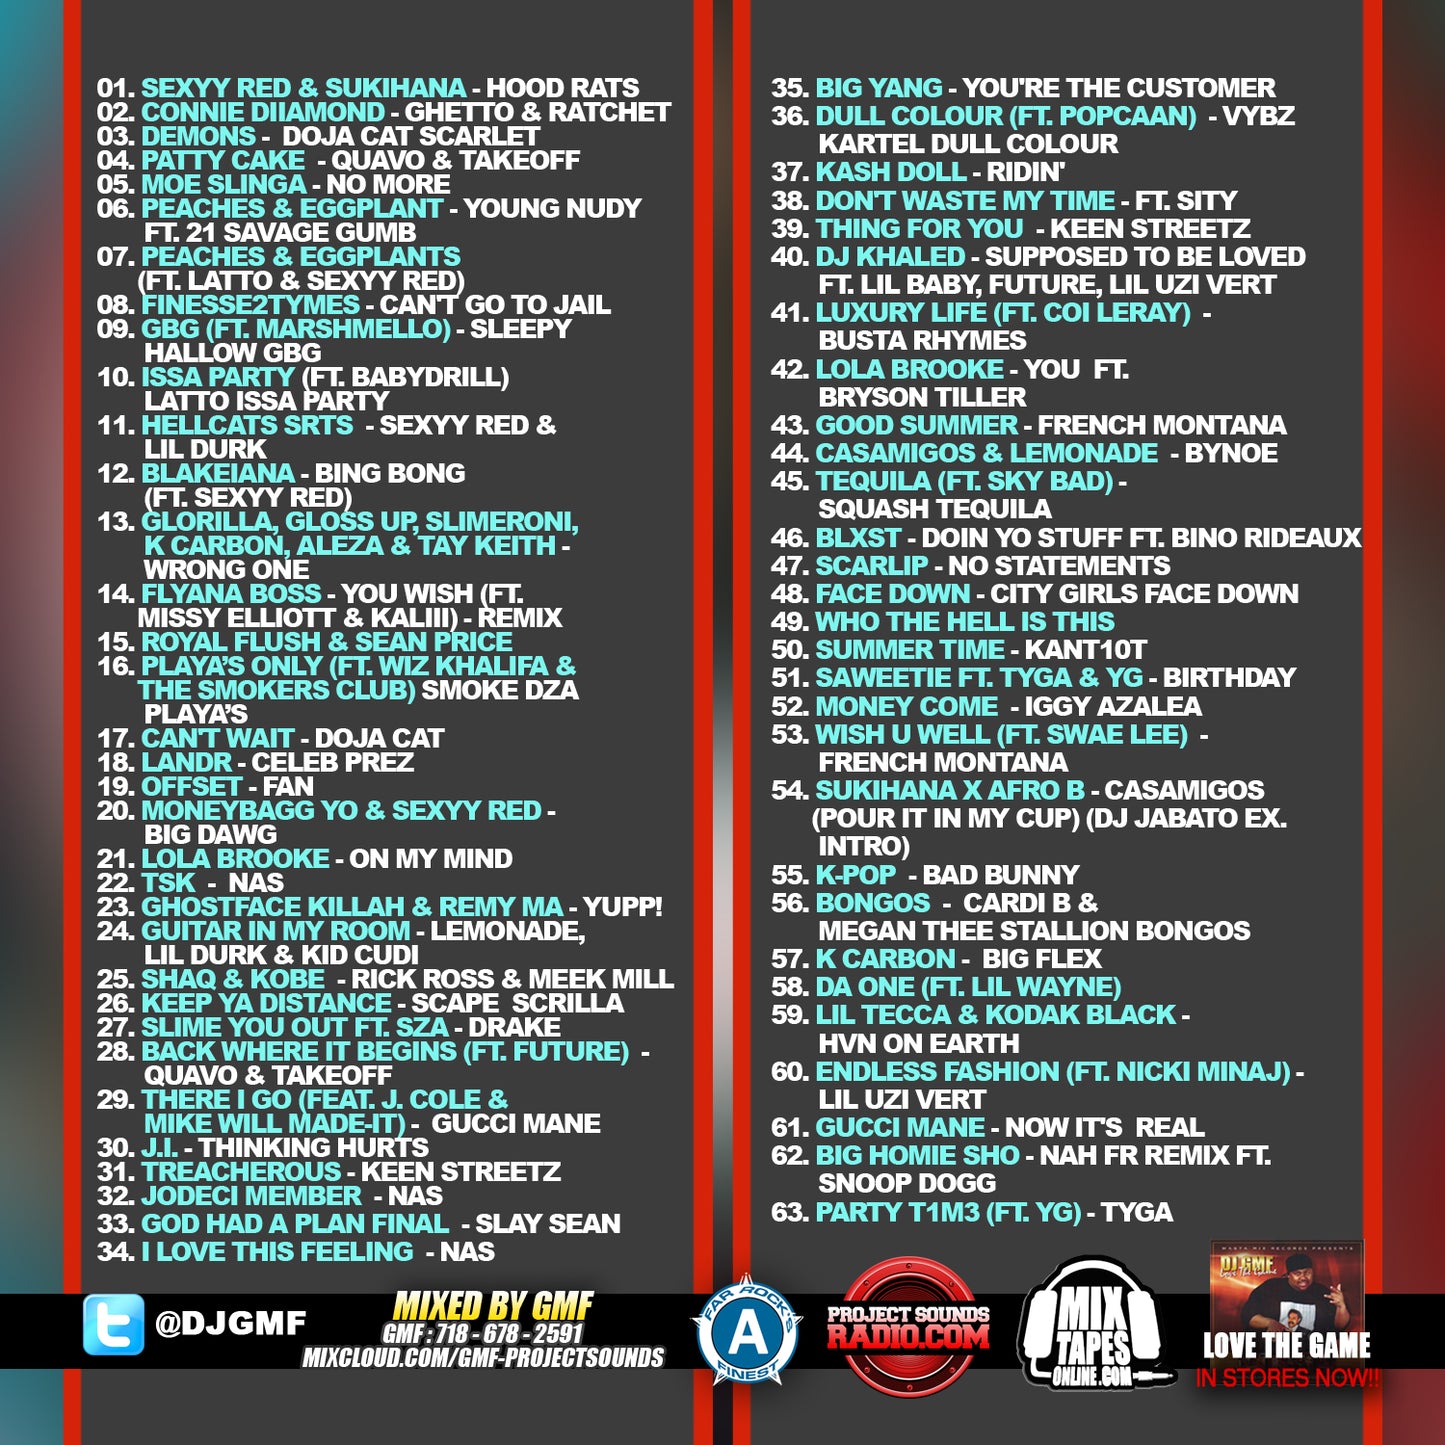 GMF GOES IN ON DJGMF.COM VOL.58